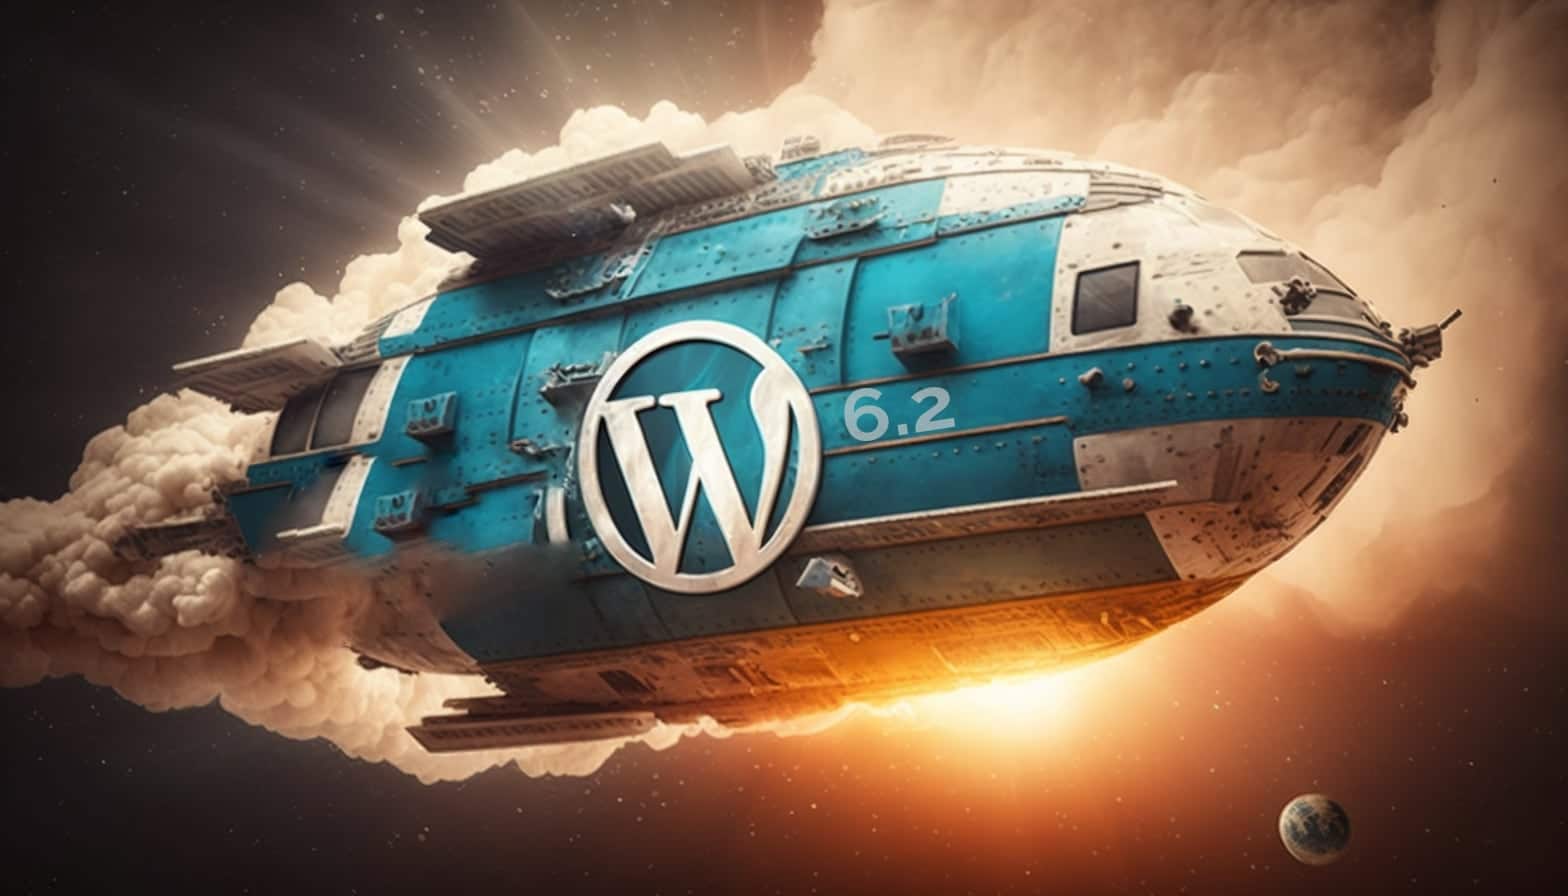 WordPress 6.2 – A preview of New Features and Improvements